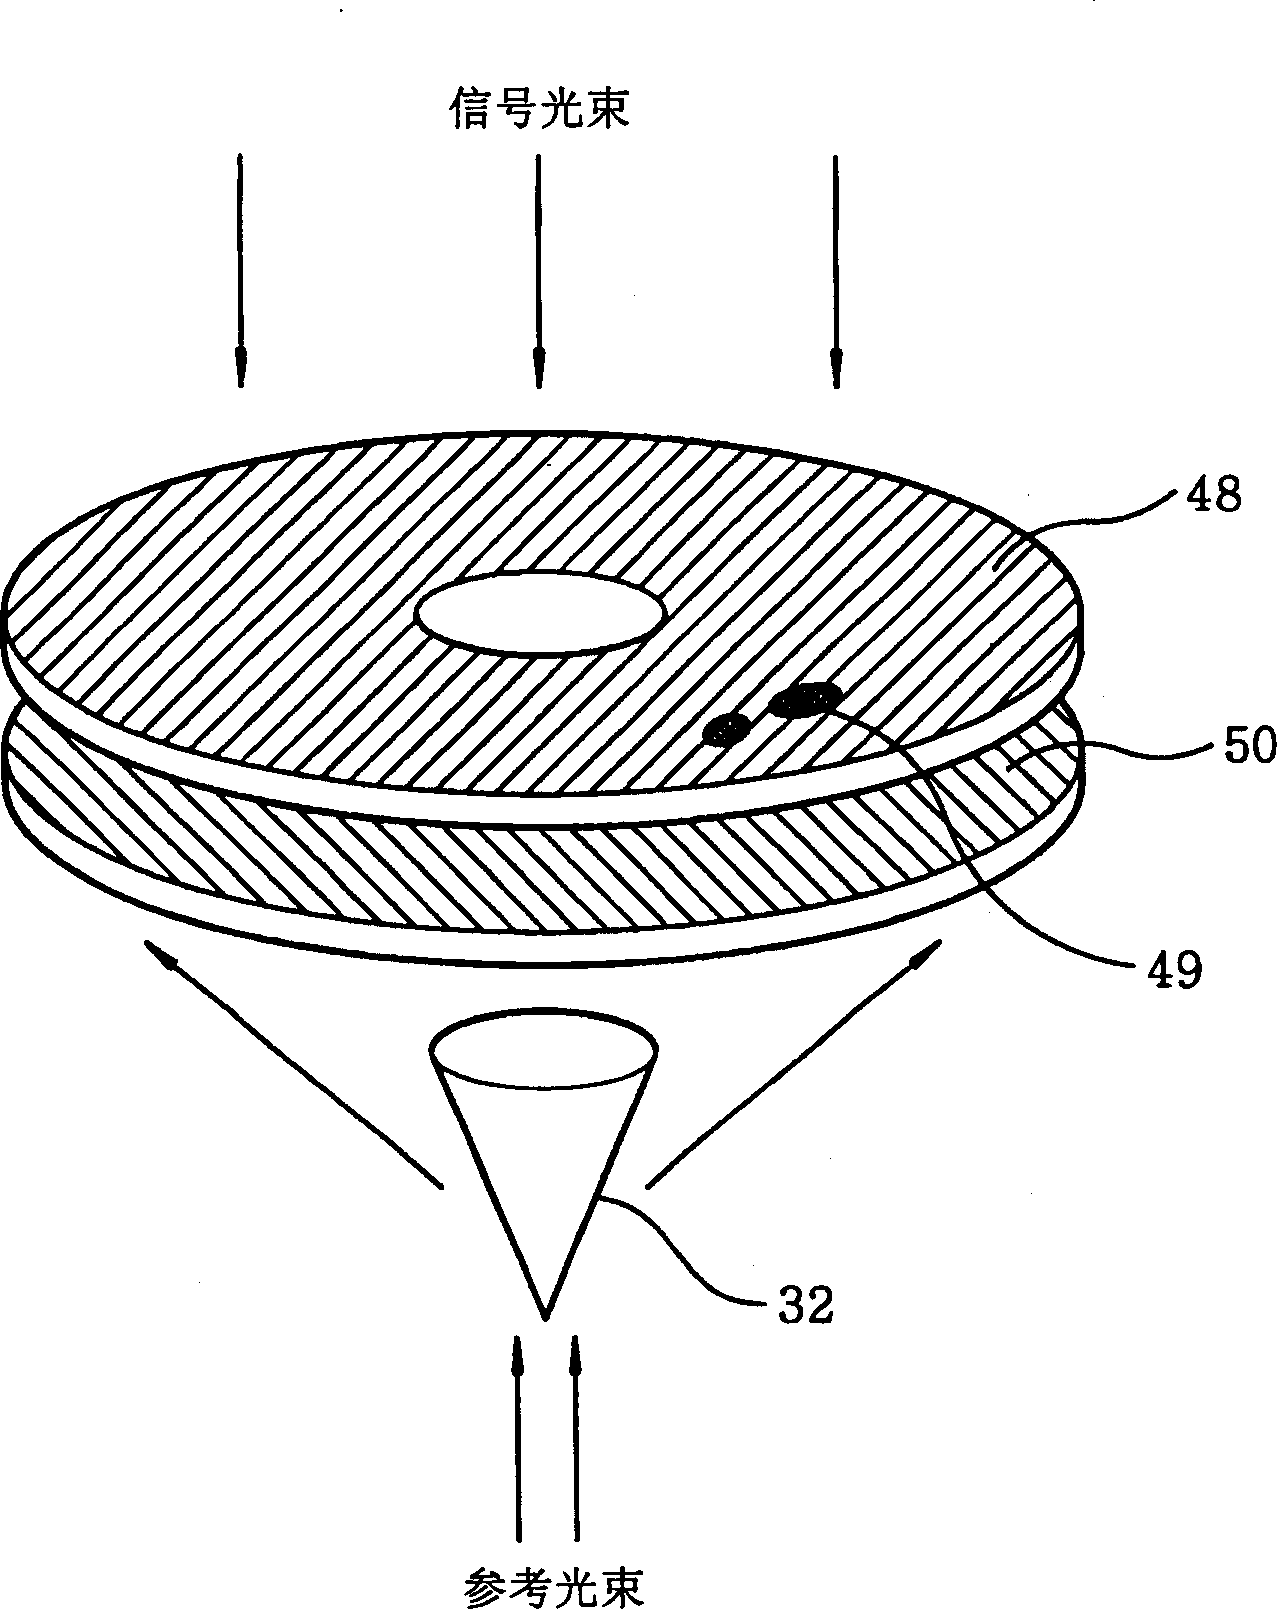 Holographic data recording apparatus and method